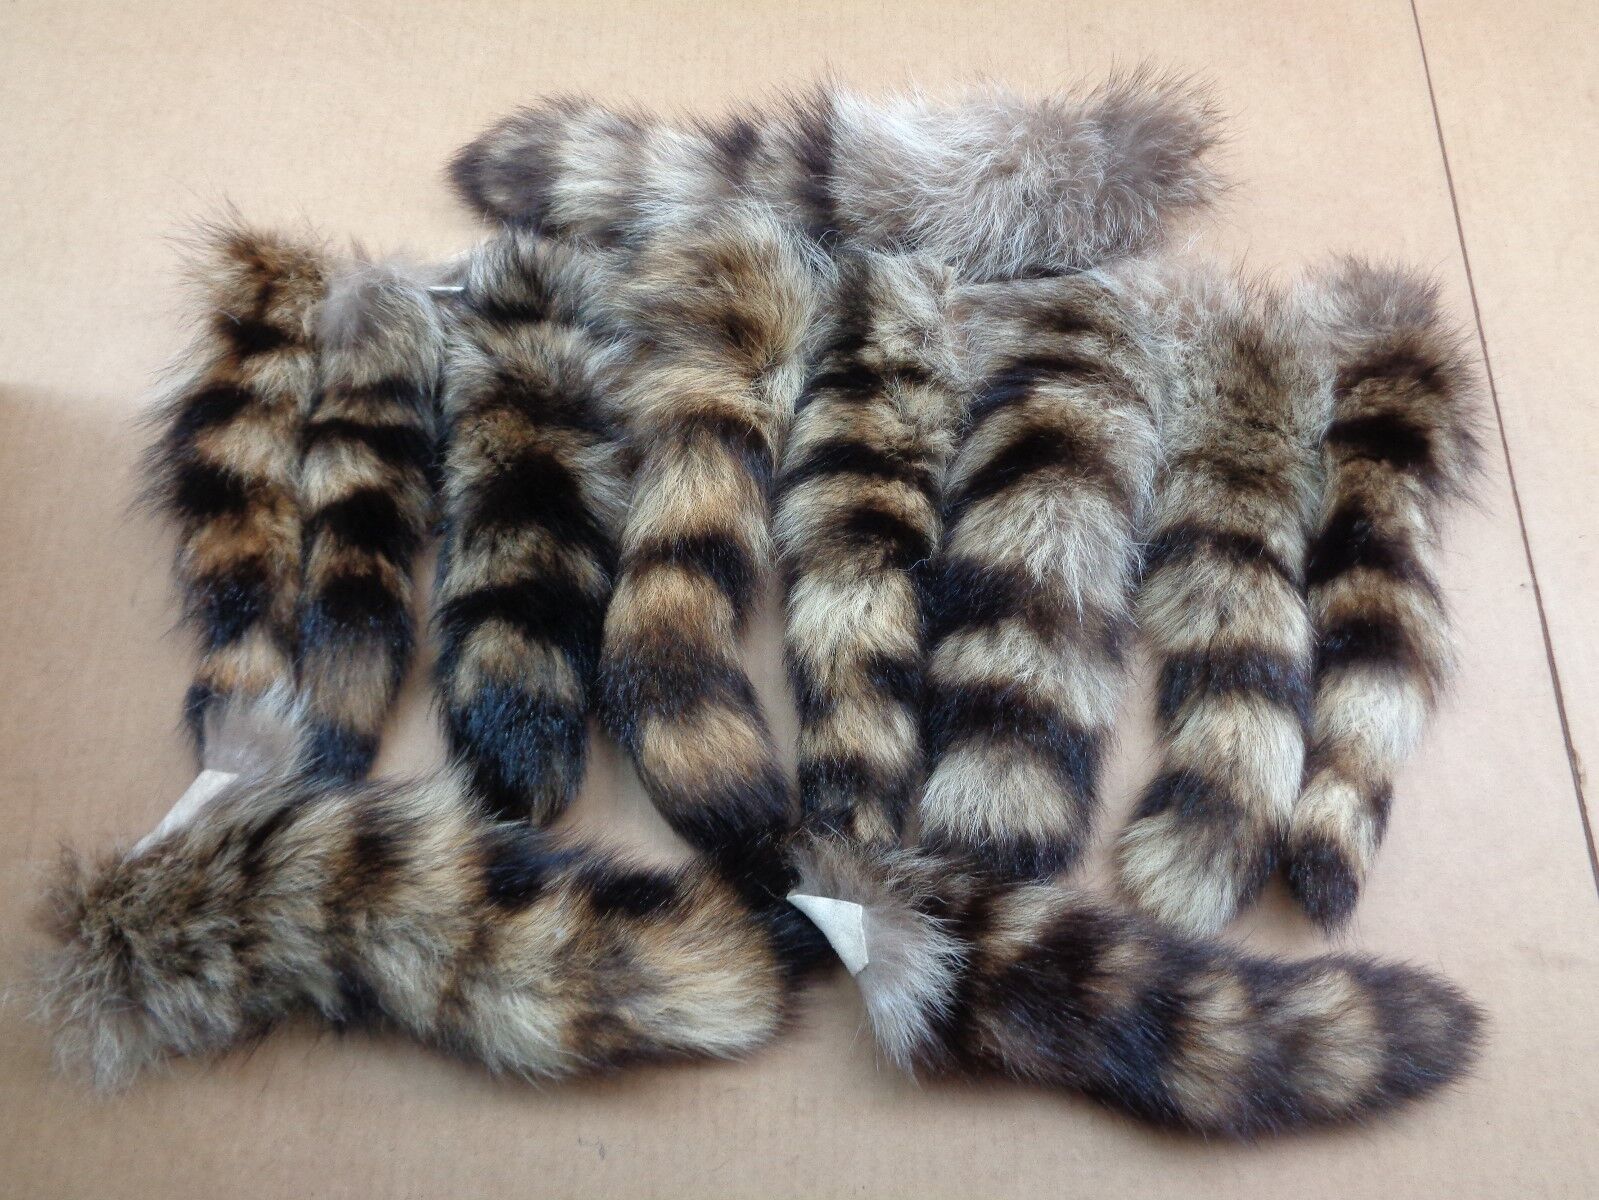 XL Tanned Raccoon Tail/Crafts/Real USA Fur Tail/Harley parts/Coon Tails/Cat Toys